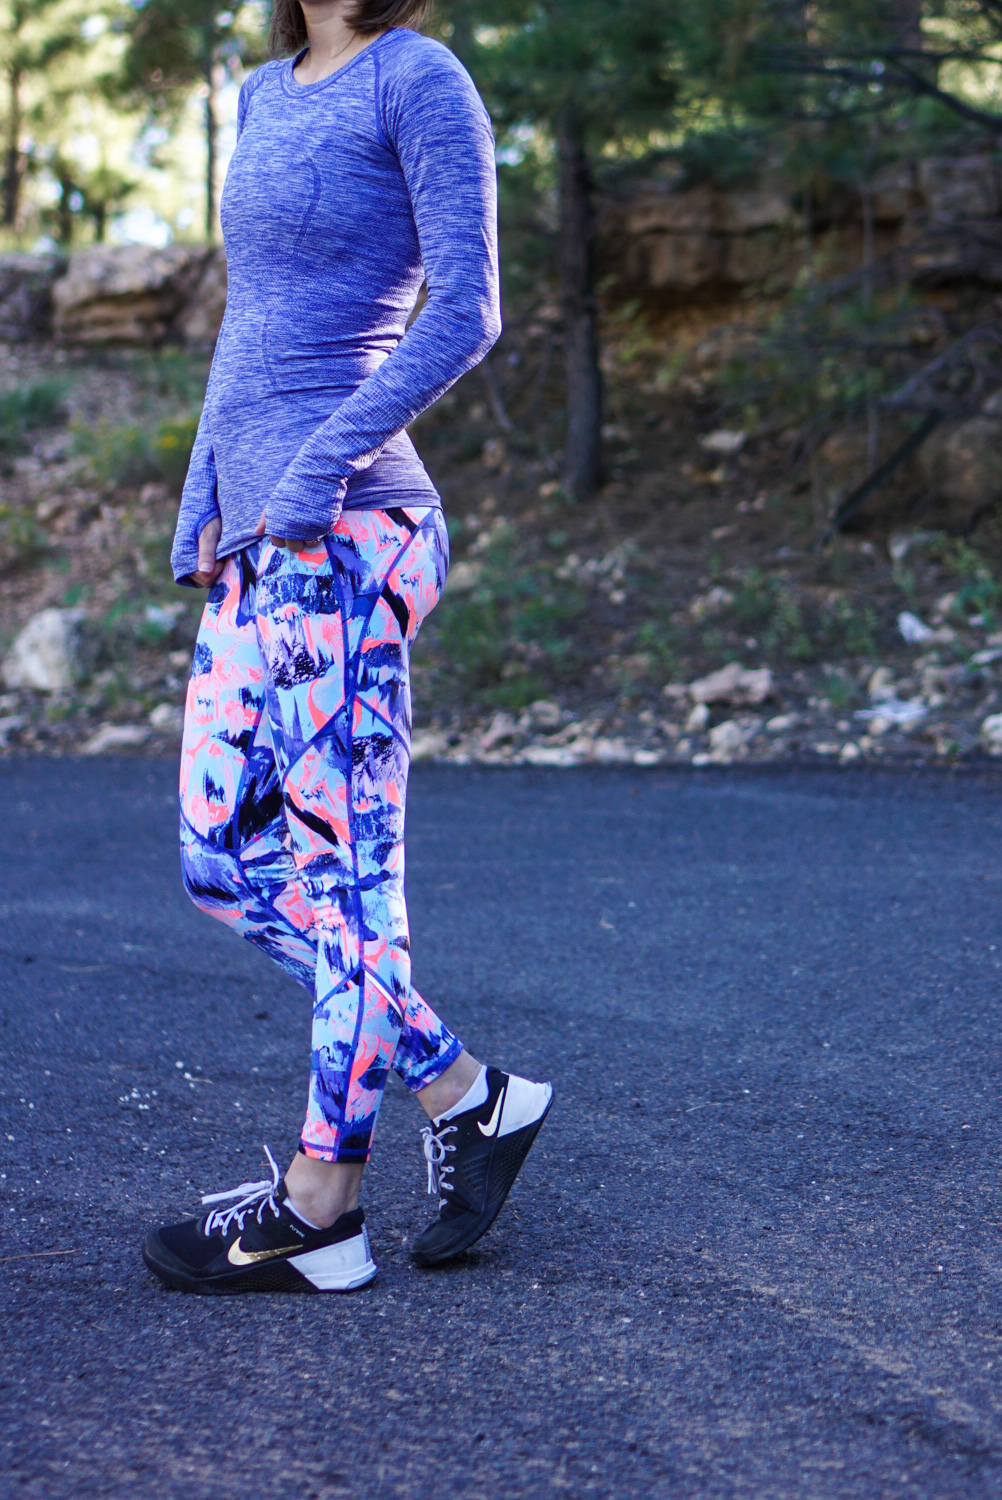 Another Way to Wear Printed Leggings